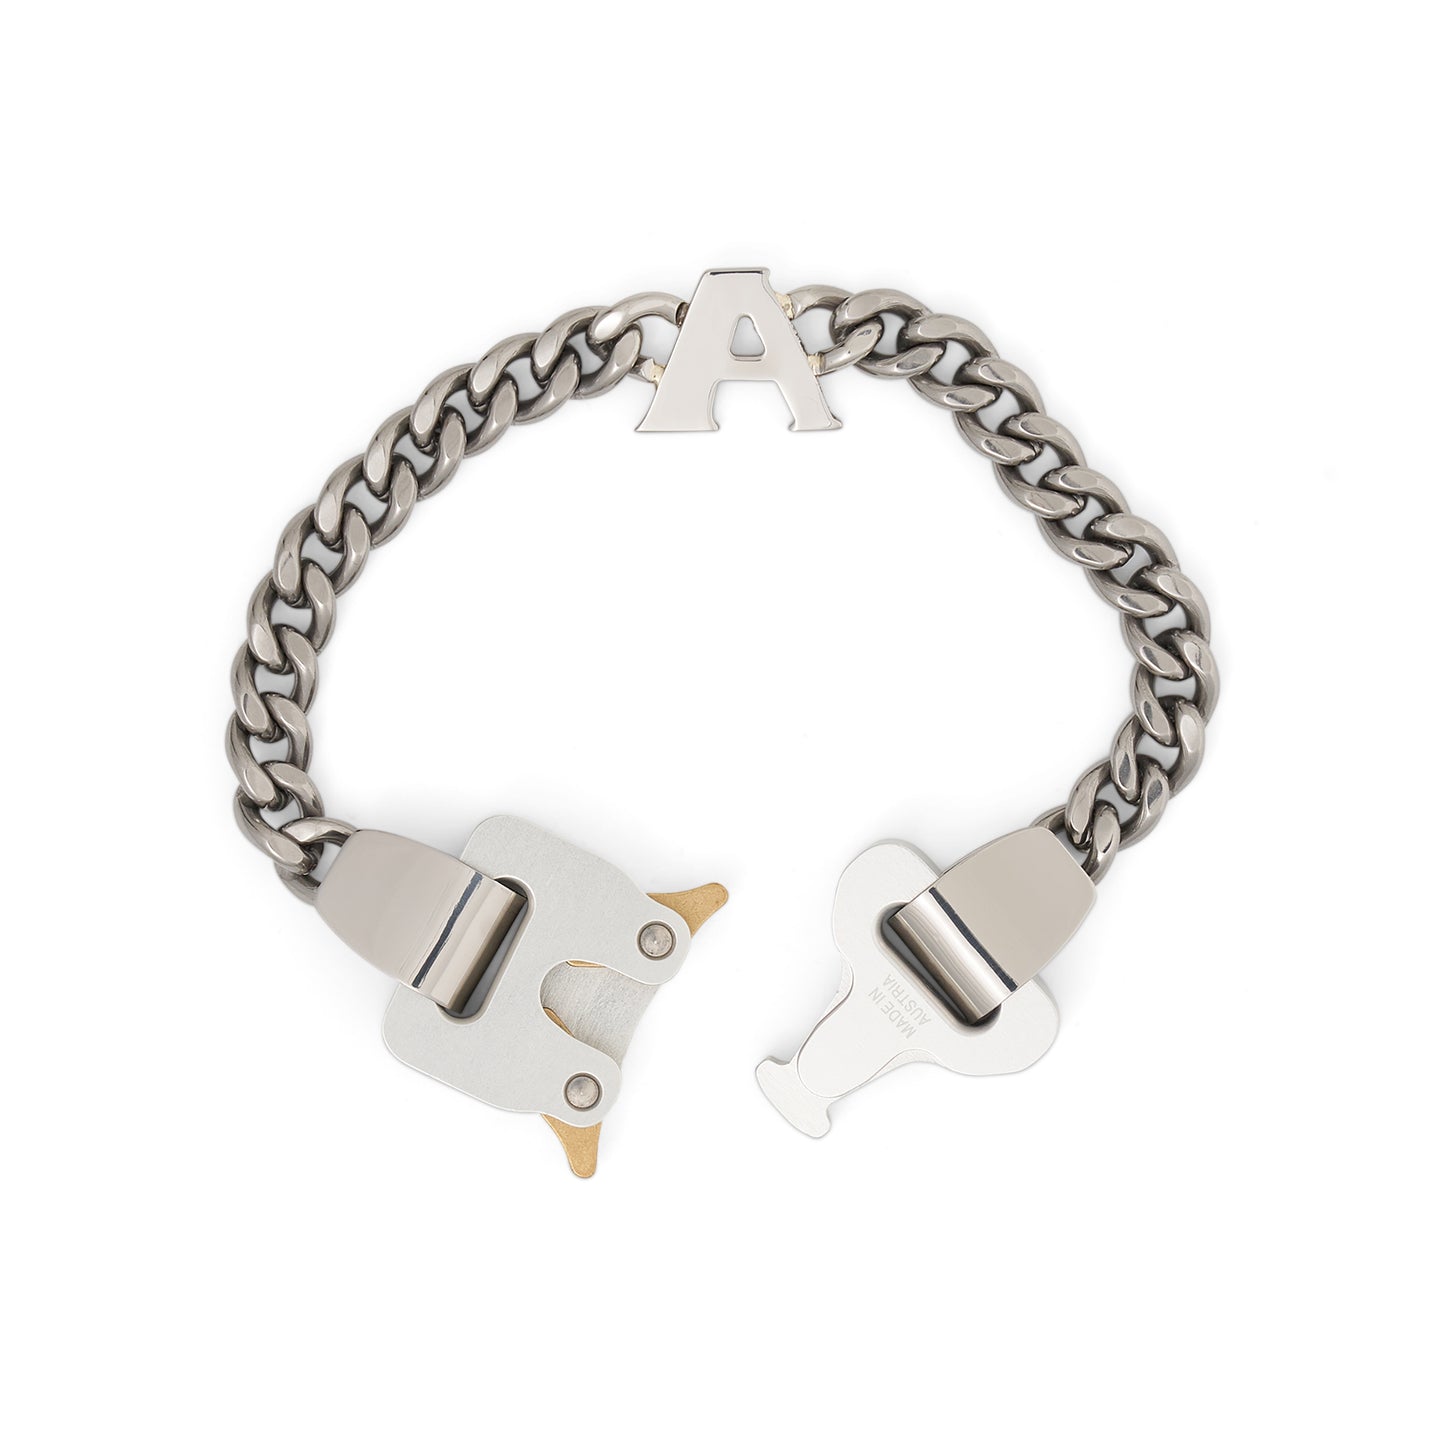 Buckle Bracelet with Charm in Silver